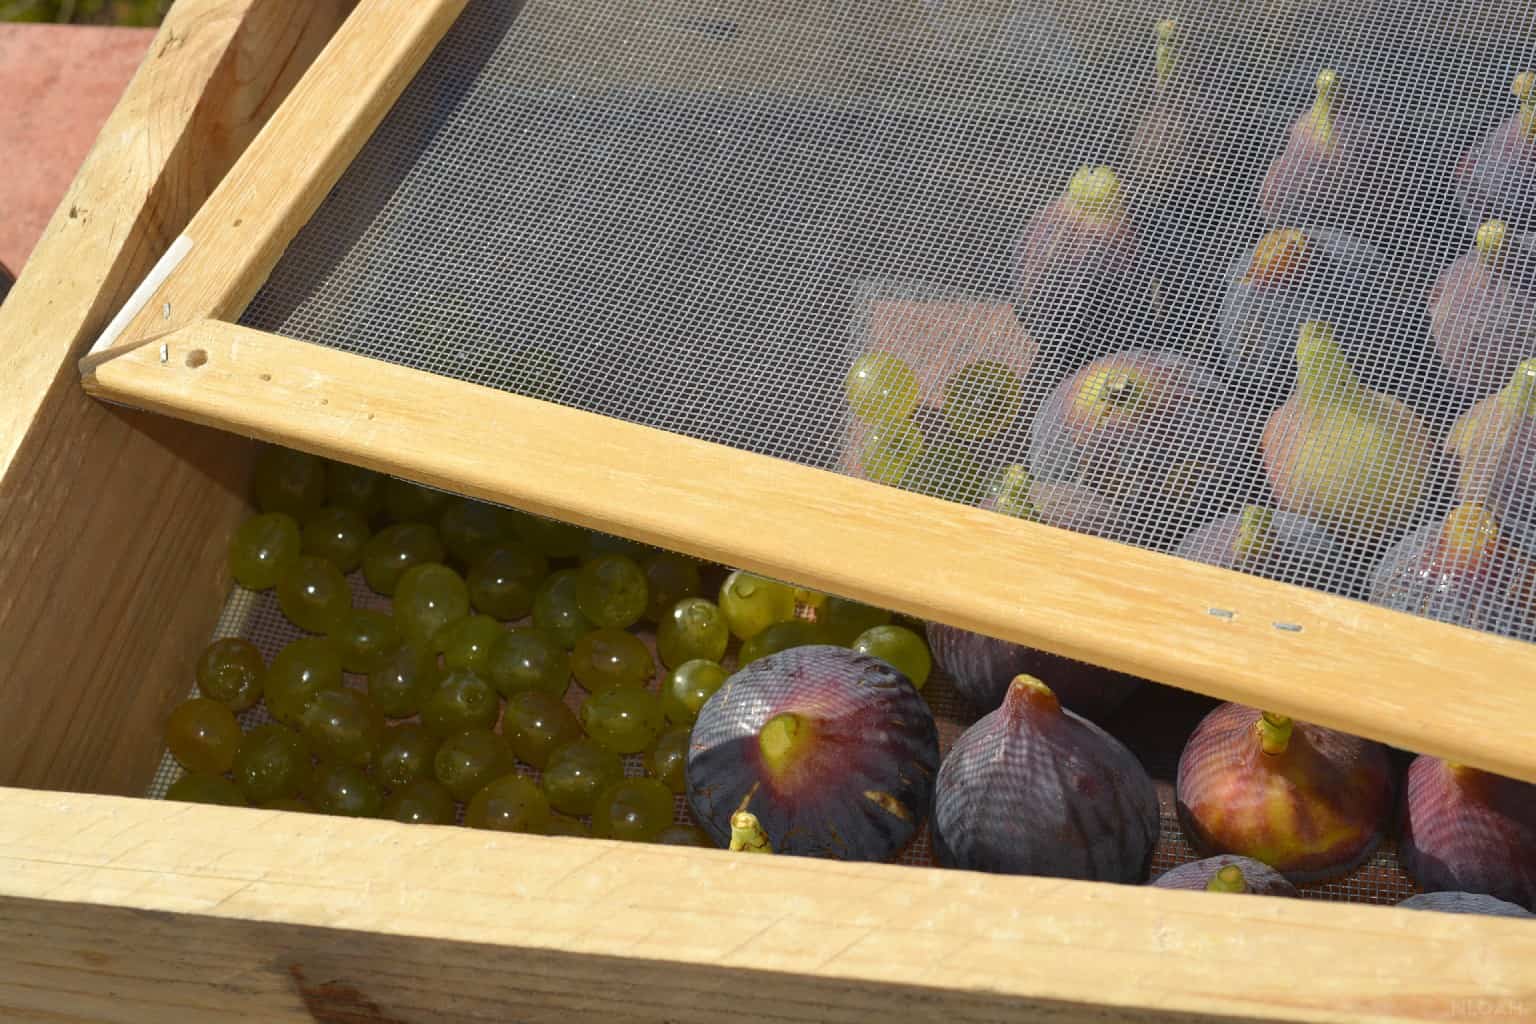 fruits in an opened drying rack